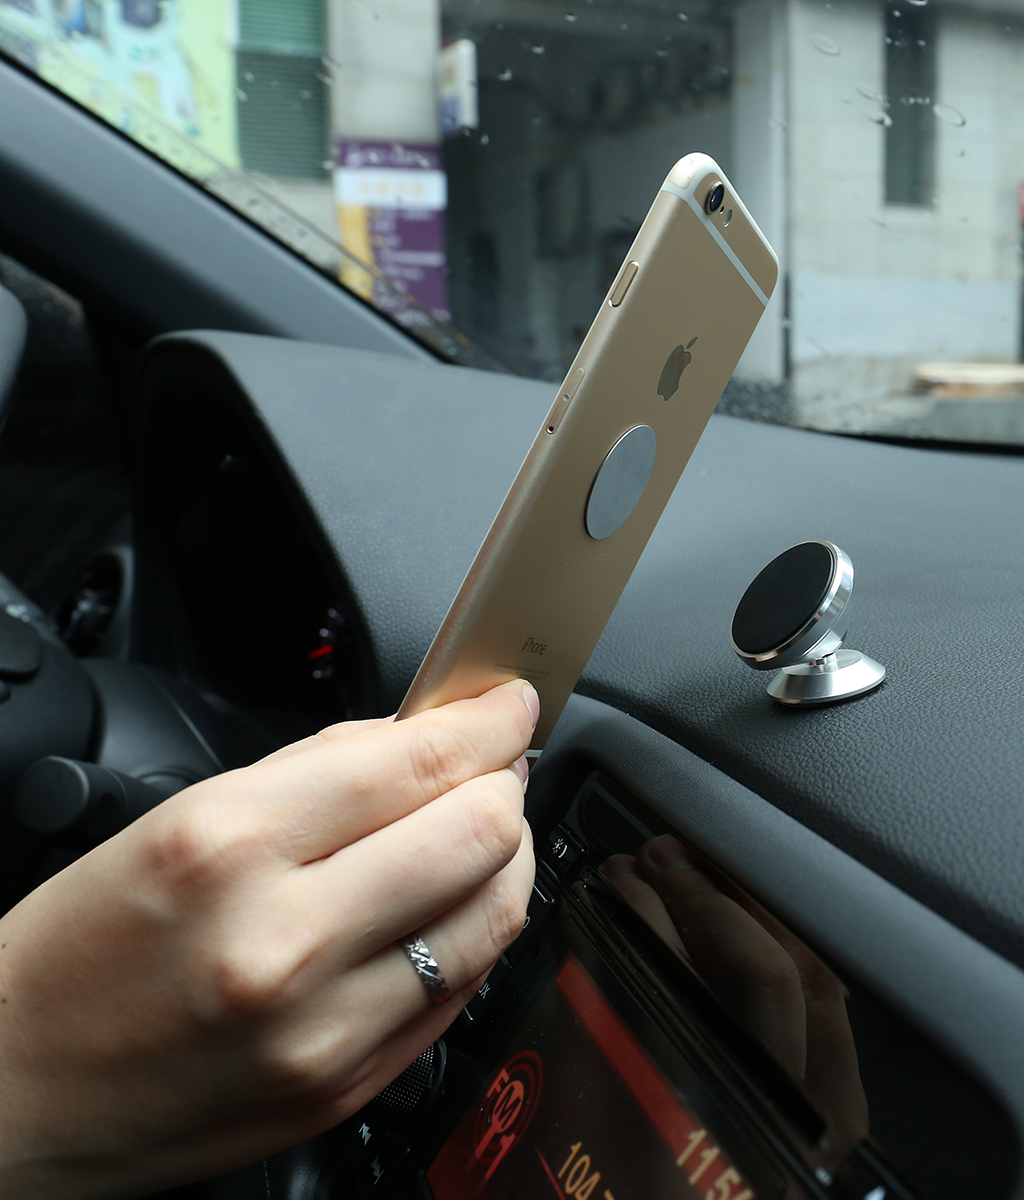 Universal Magnetic Mobile Mount in use